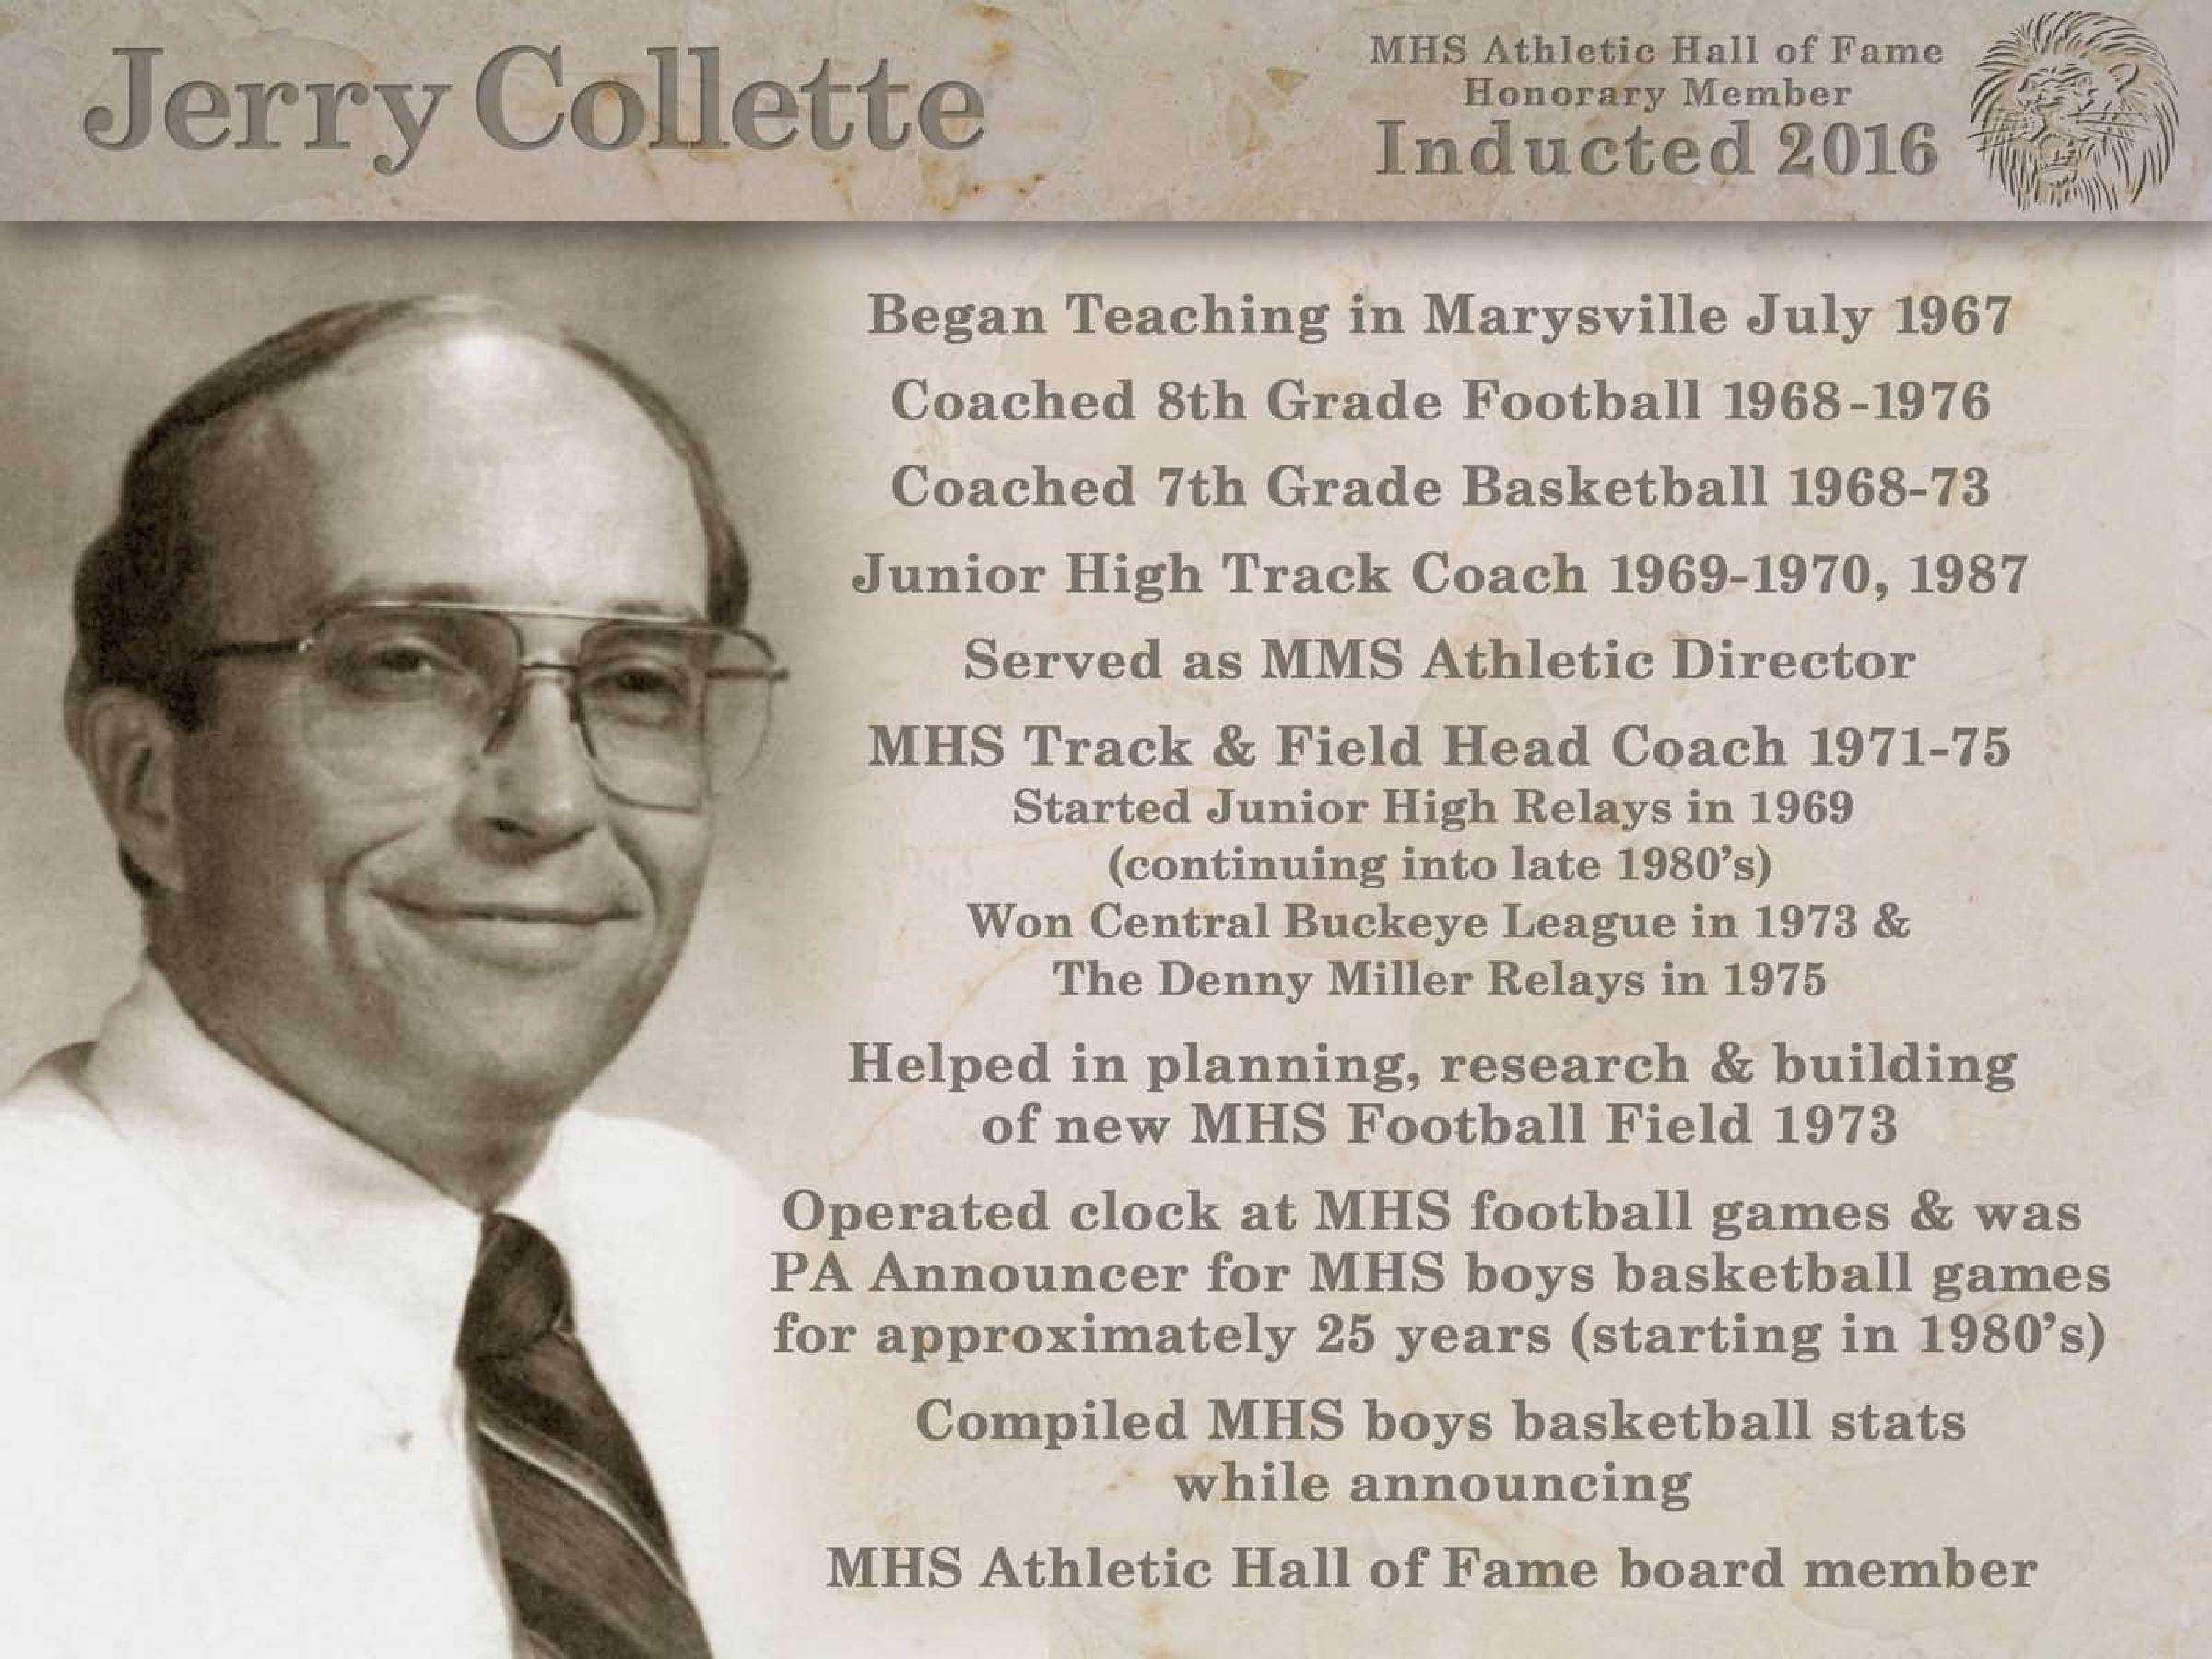 Jerry Collette